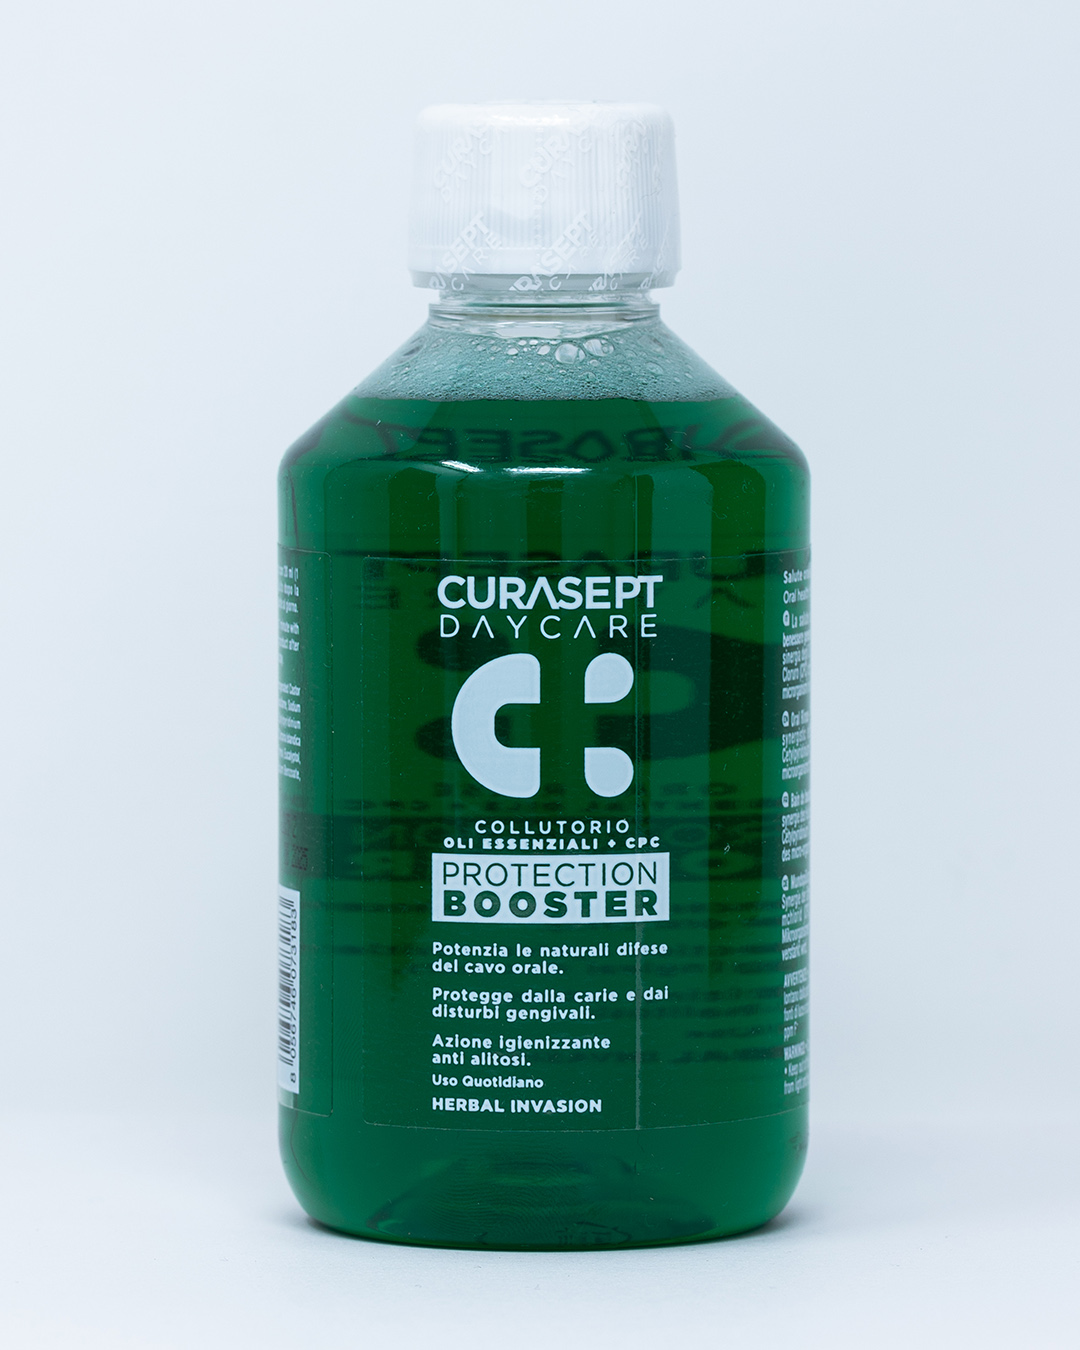 Curasept Collutorio Daycare Protection Booster Herbal Invasion - 250 ml